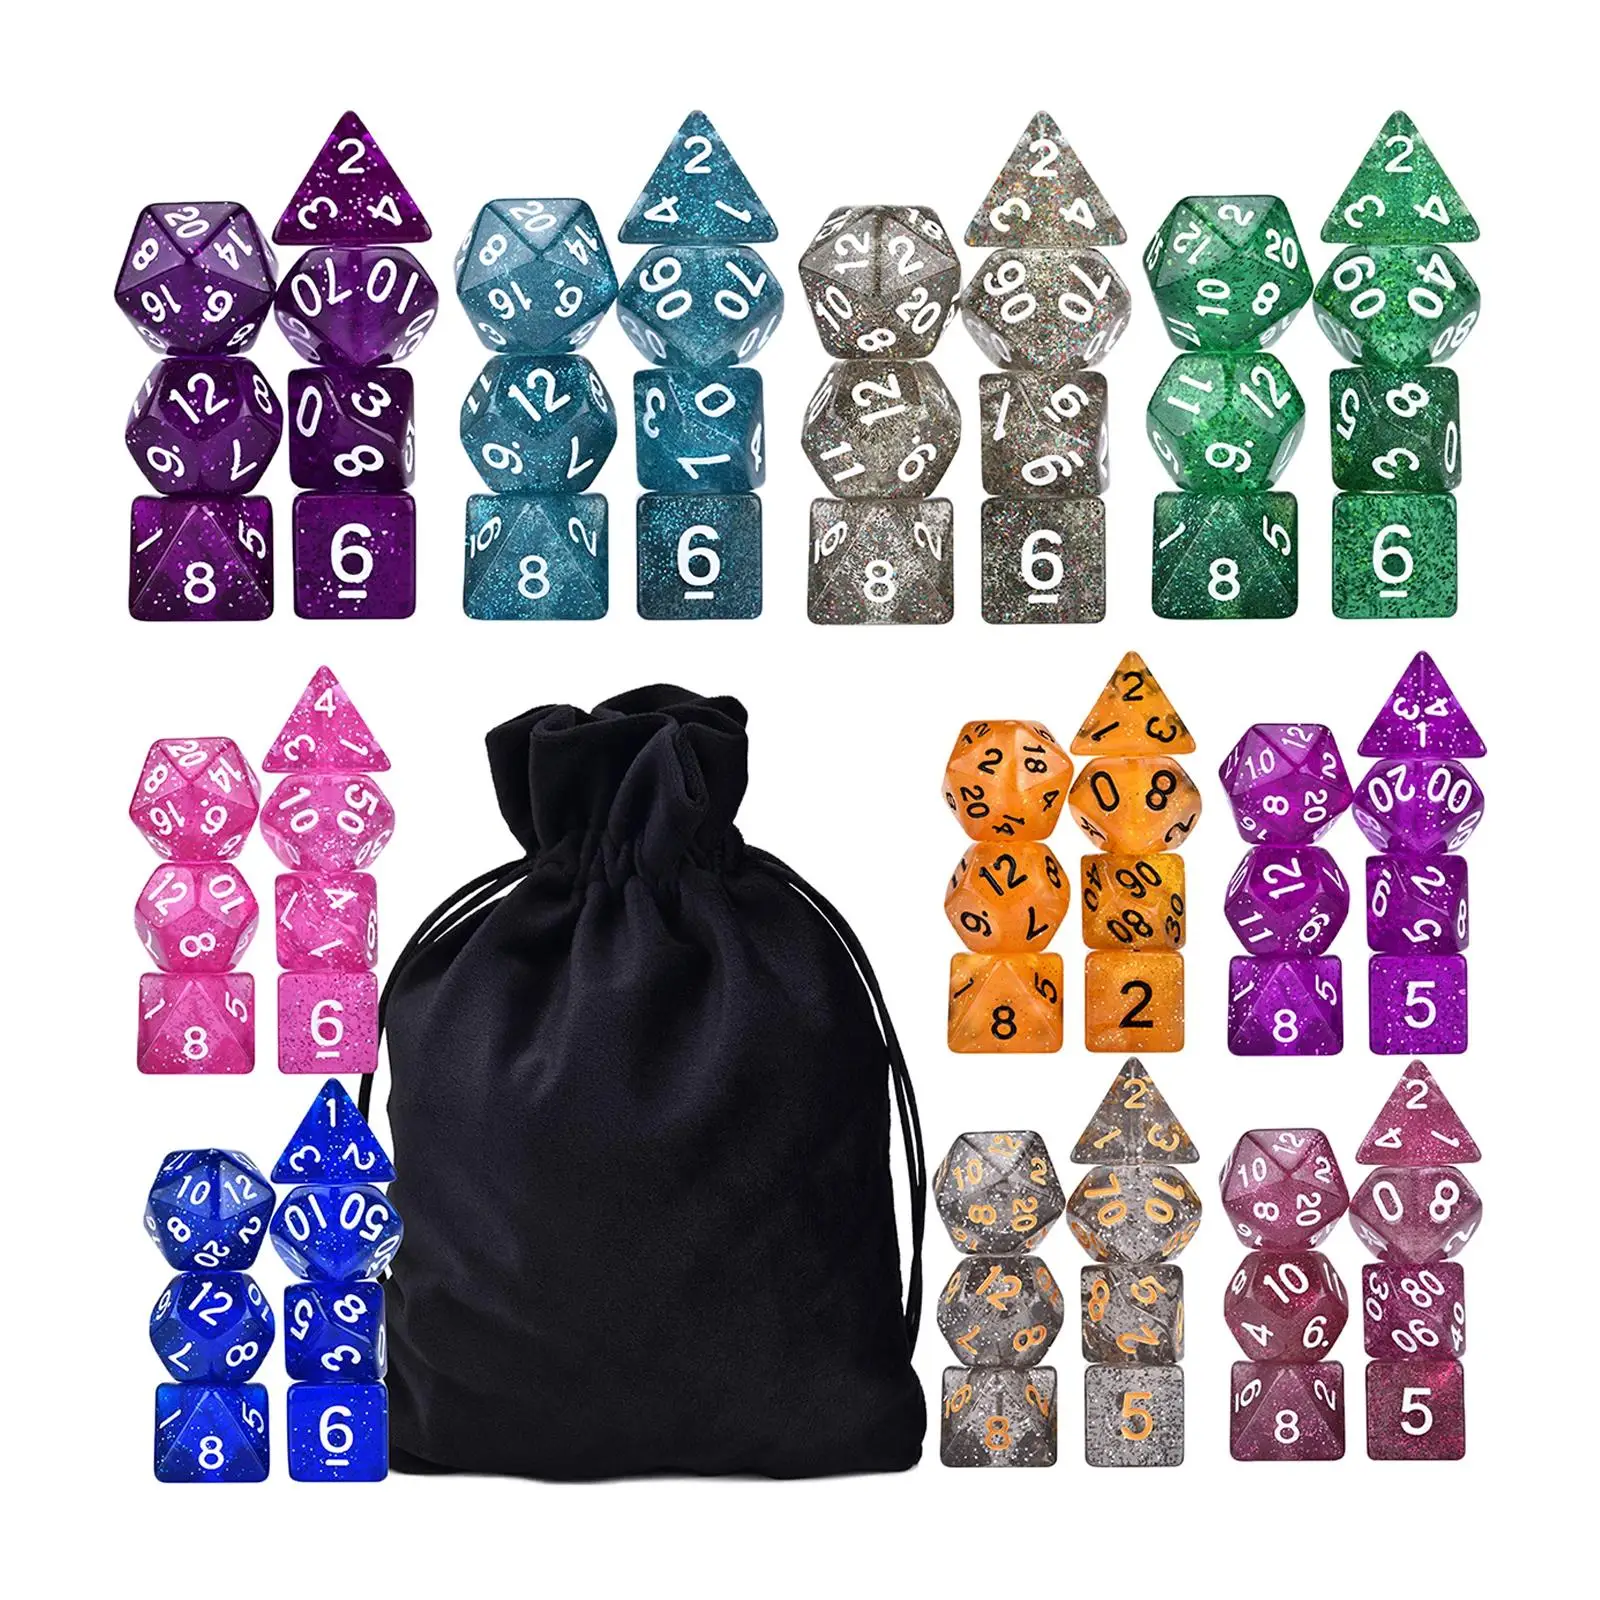 70Pcs Acrylic Polyhedral Dice Set Double Colors D4-D20 with Storage Bag for Role Playing MTG DND Math Teaching Table Games